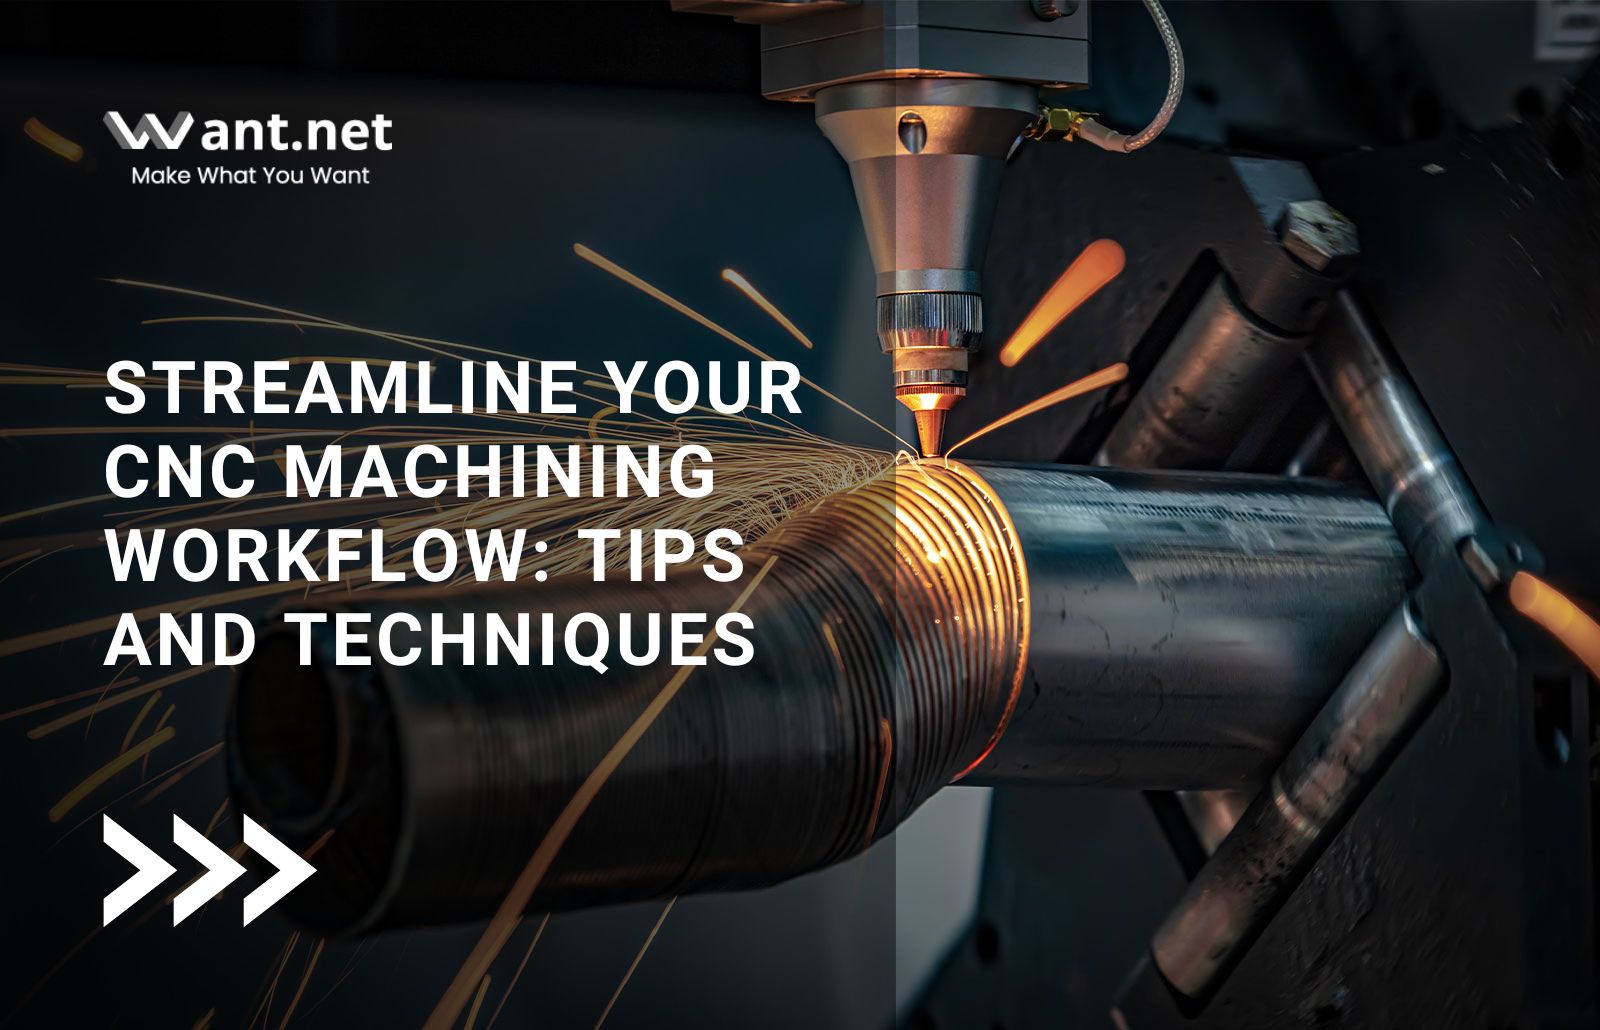 Streamline Your CNC Machining Workflow: Tips and Techniques